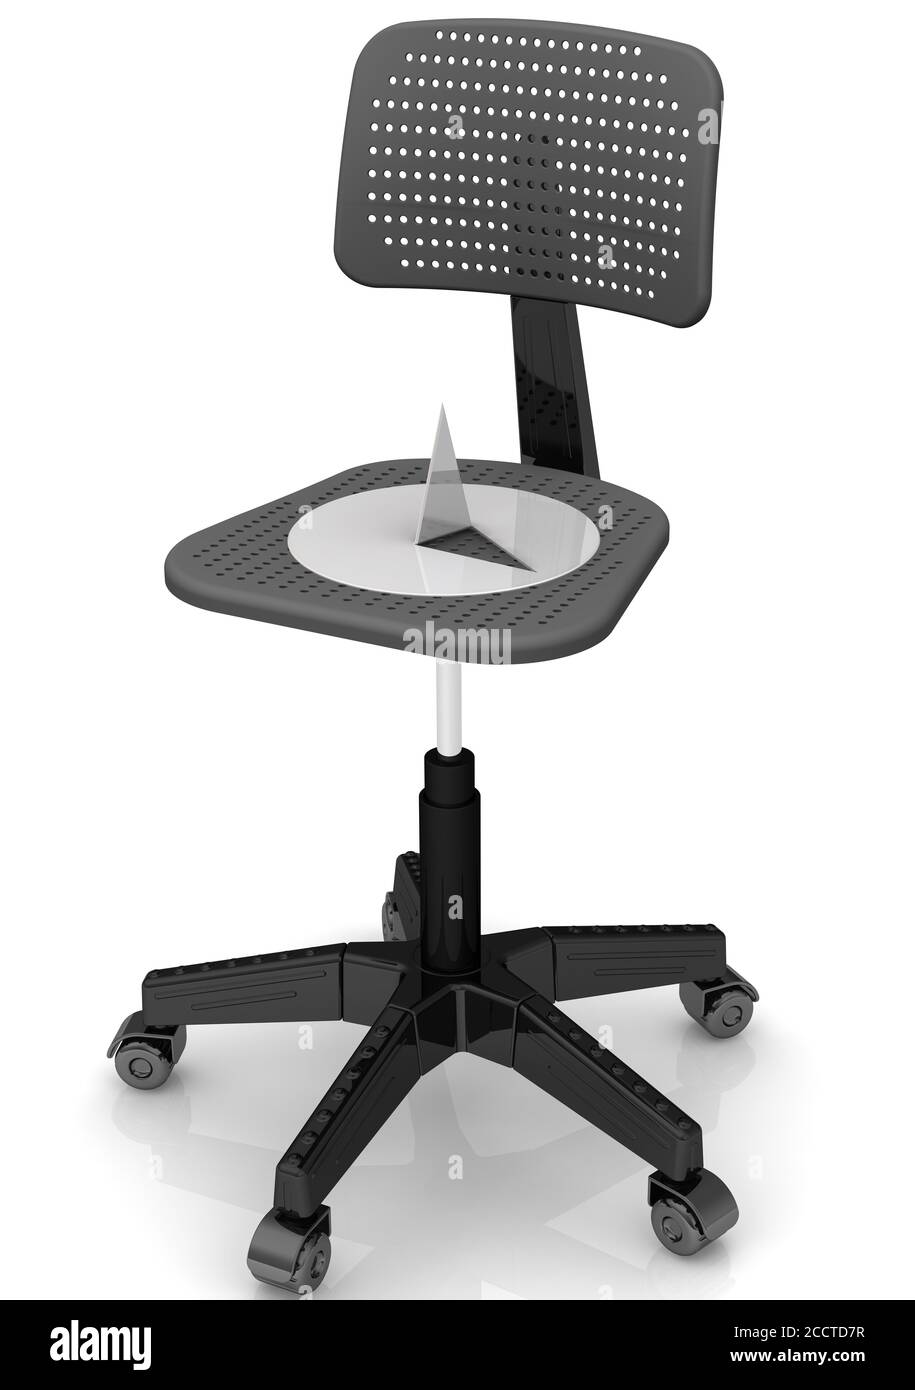 Thumbtack lying on an office chair. A large and sharp thumbtack lying on an office chair. 3D illustration Stock Photo